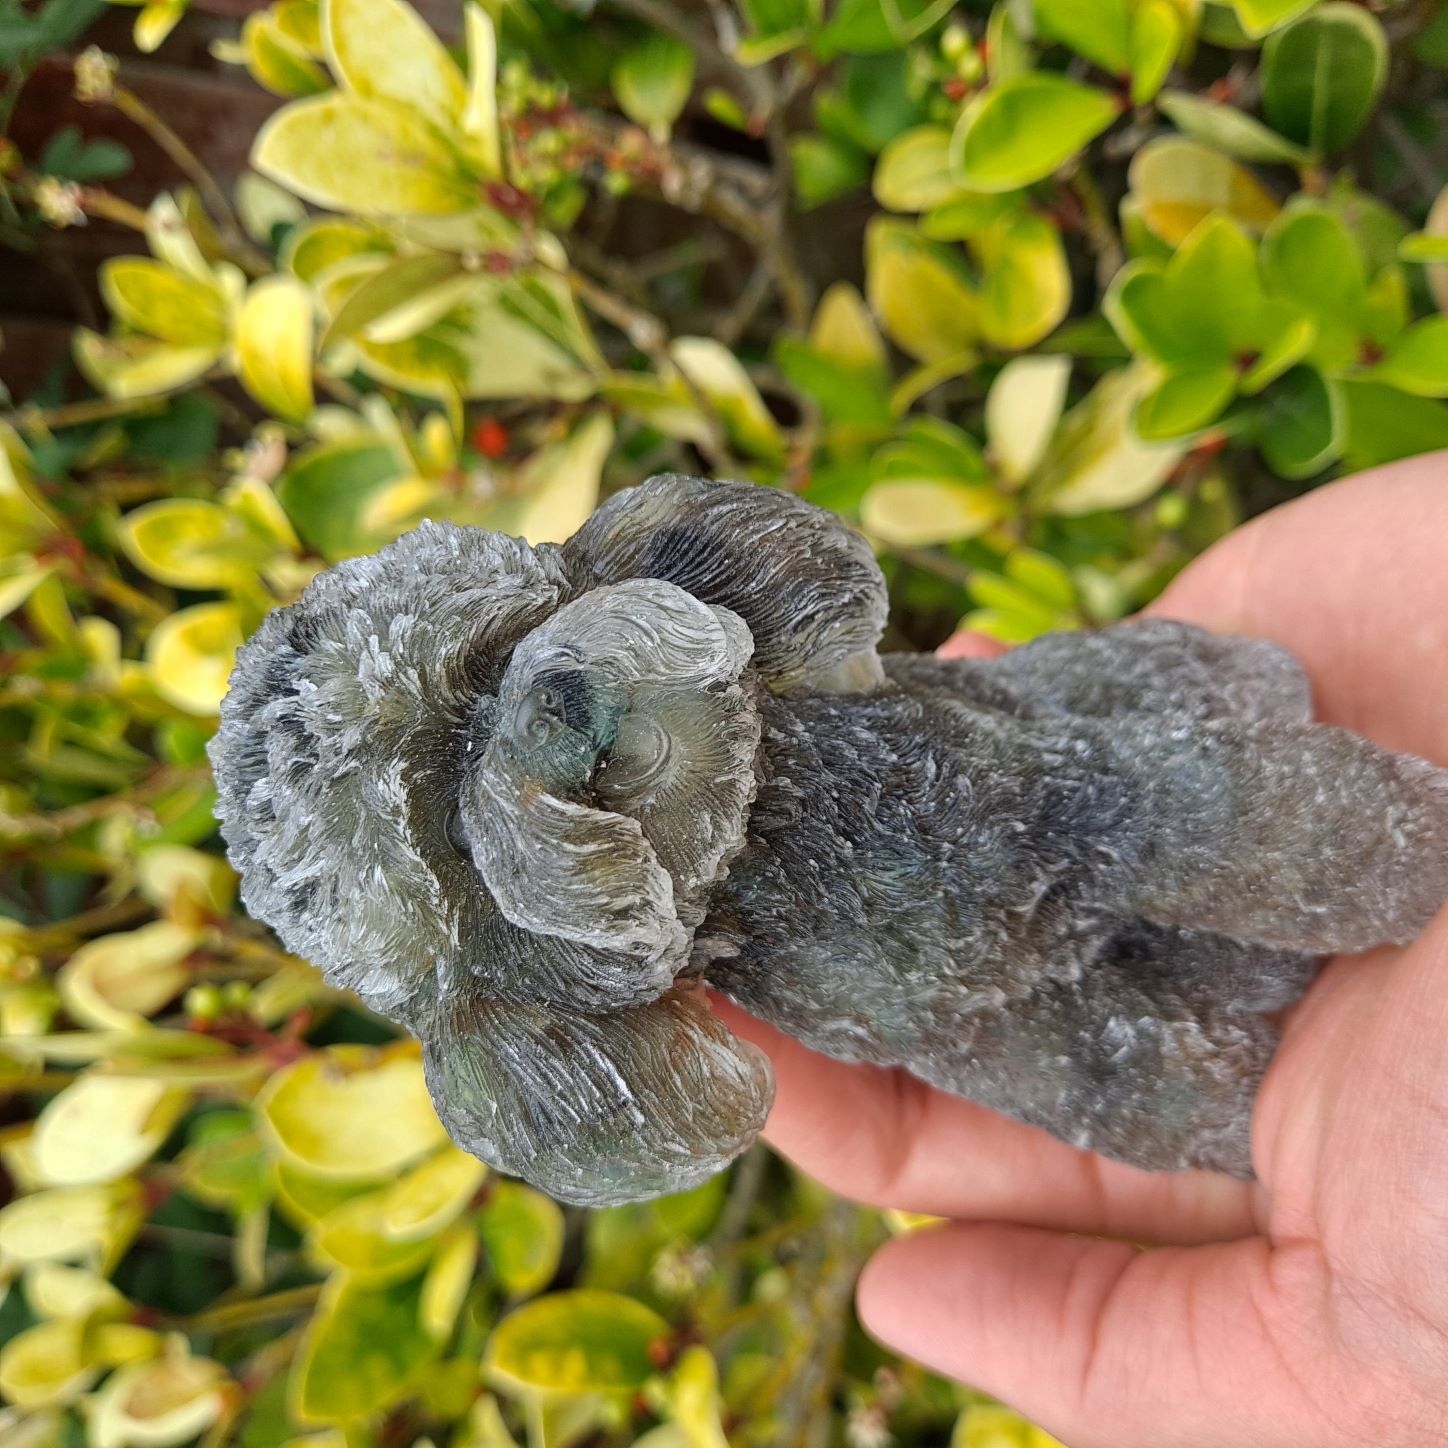 Sparkling Labradorite Poodle. A touch of magic and potential for spiritual growth in a handcrafted sculpture.